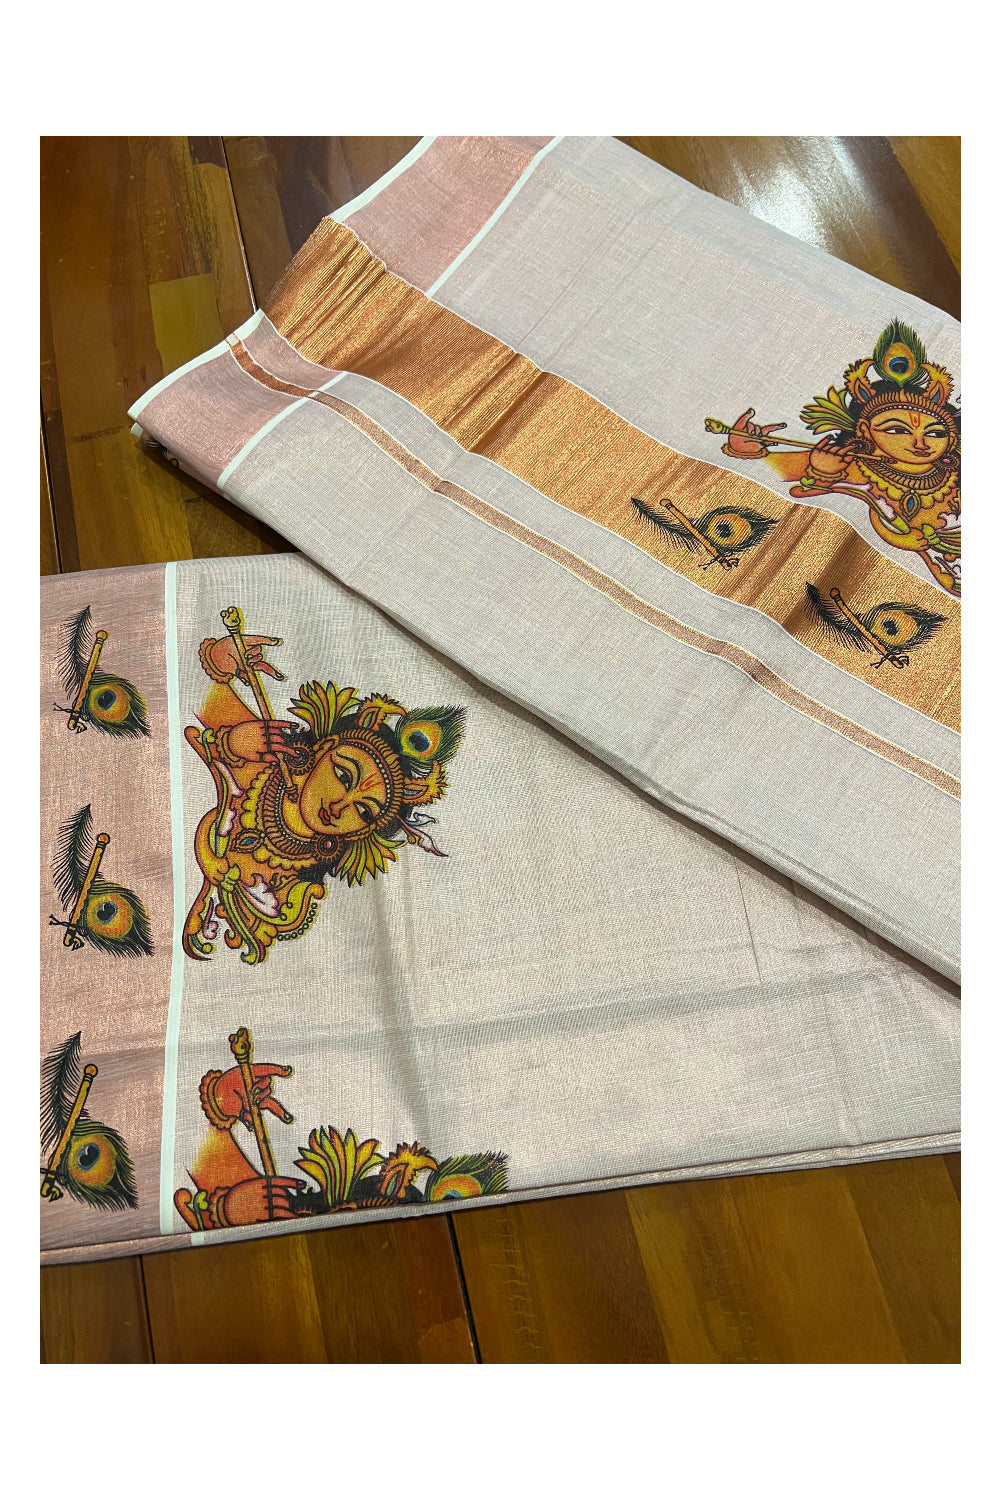 Kerala Copper Tissue Kasavu Saree With Mural Printed Krishna Face Design and Feather Prints on Border